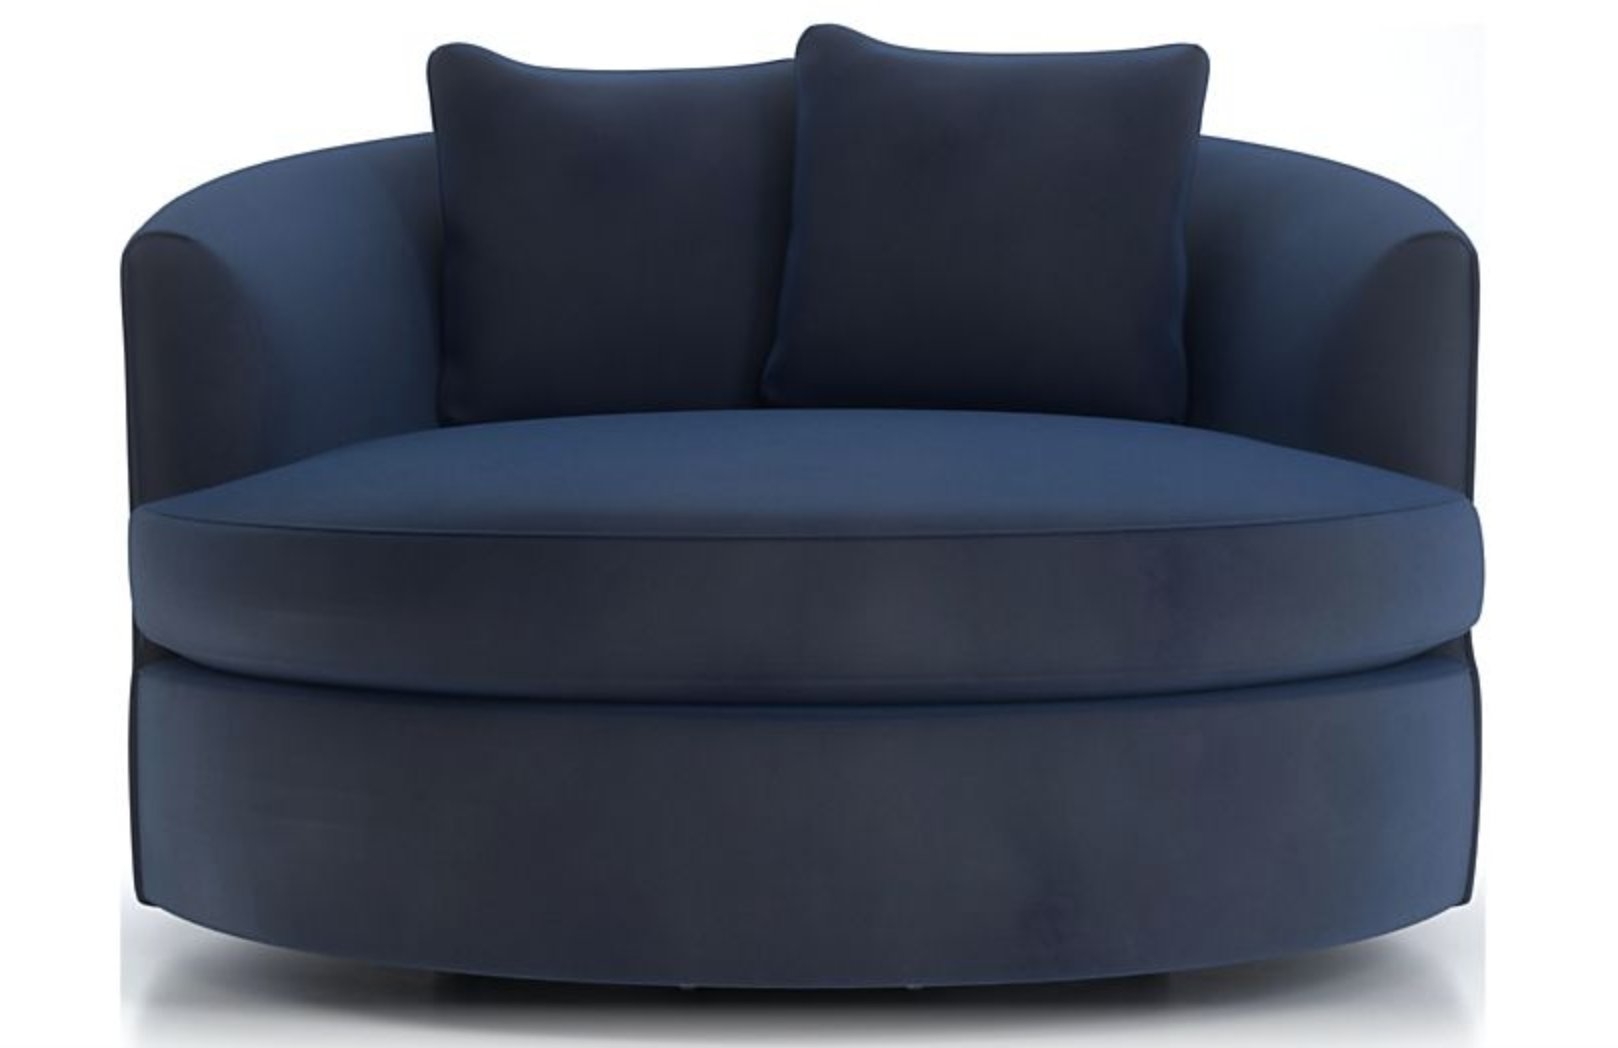 Tillie Grand Swivel Chair View, Navy - Image 0